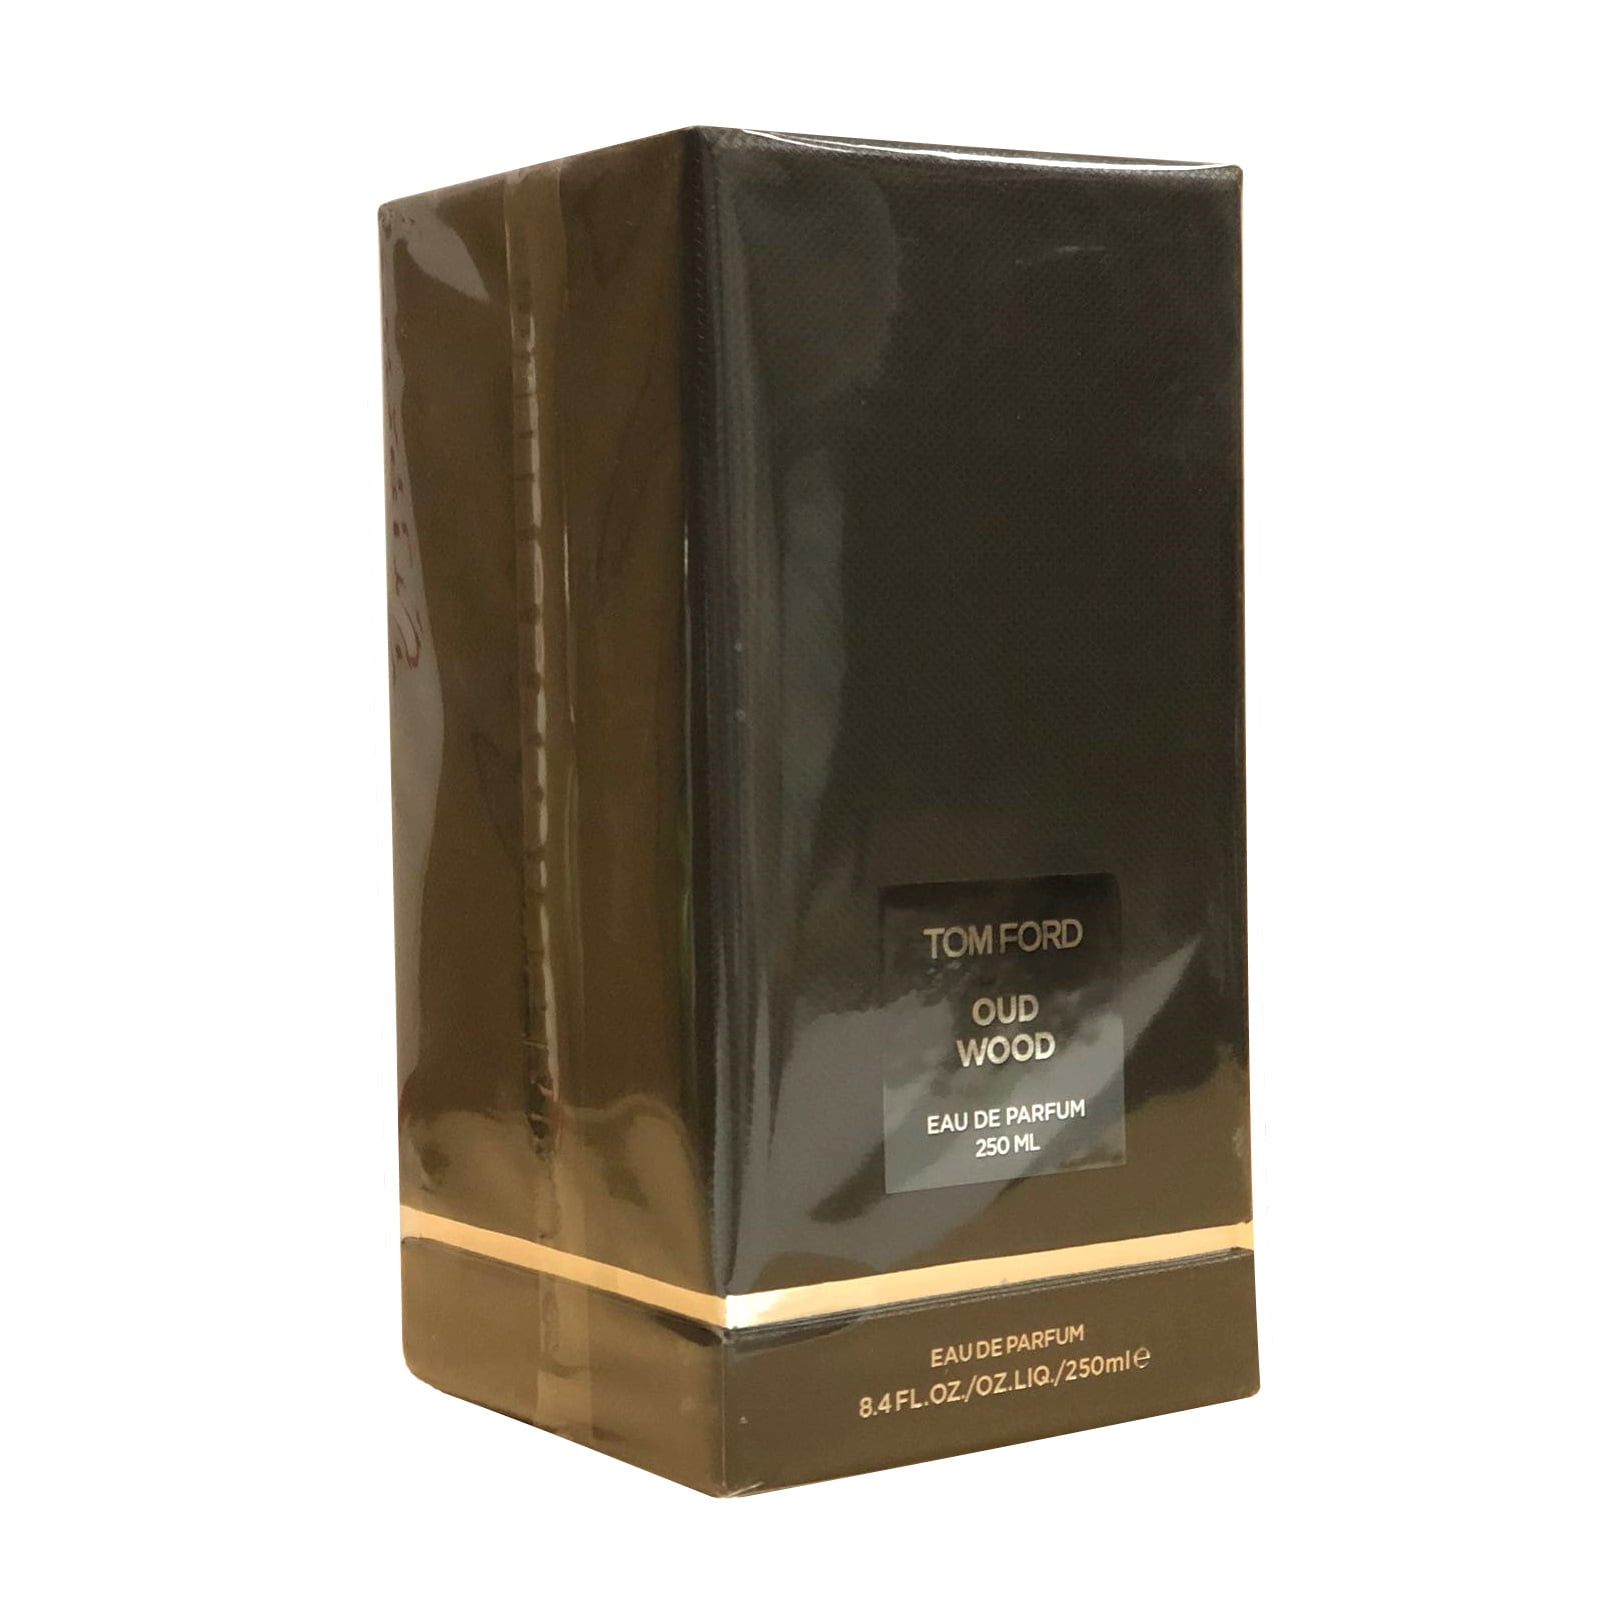 Top 96+ imagen tom ford oud wood 250ml price - Abzlocal.mx